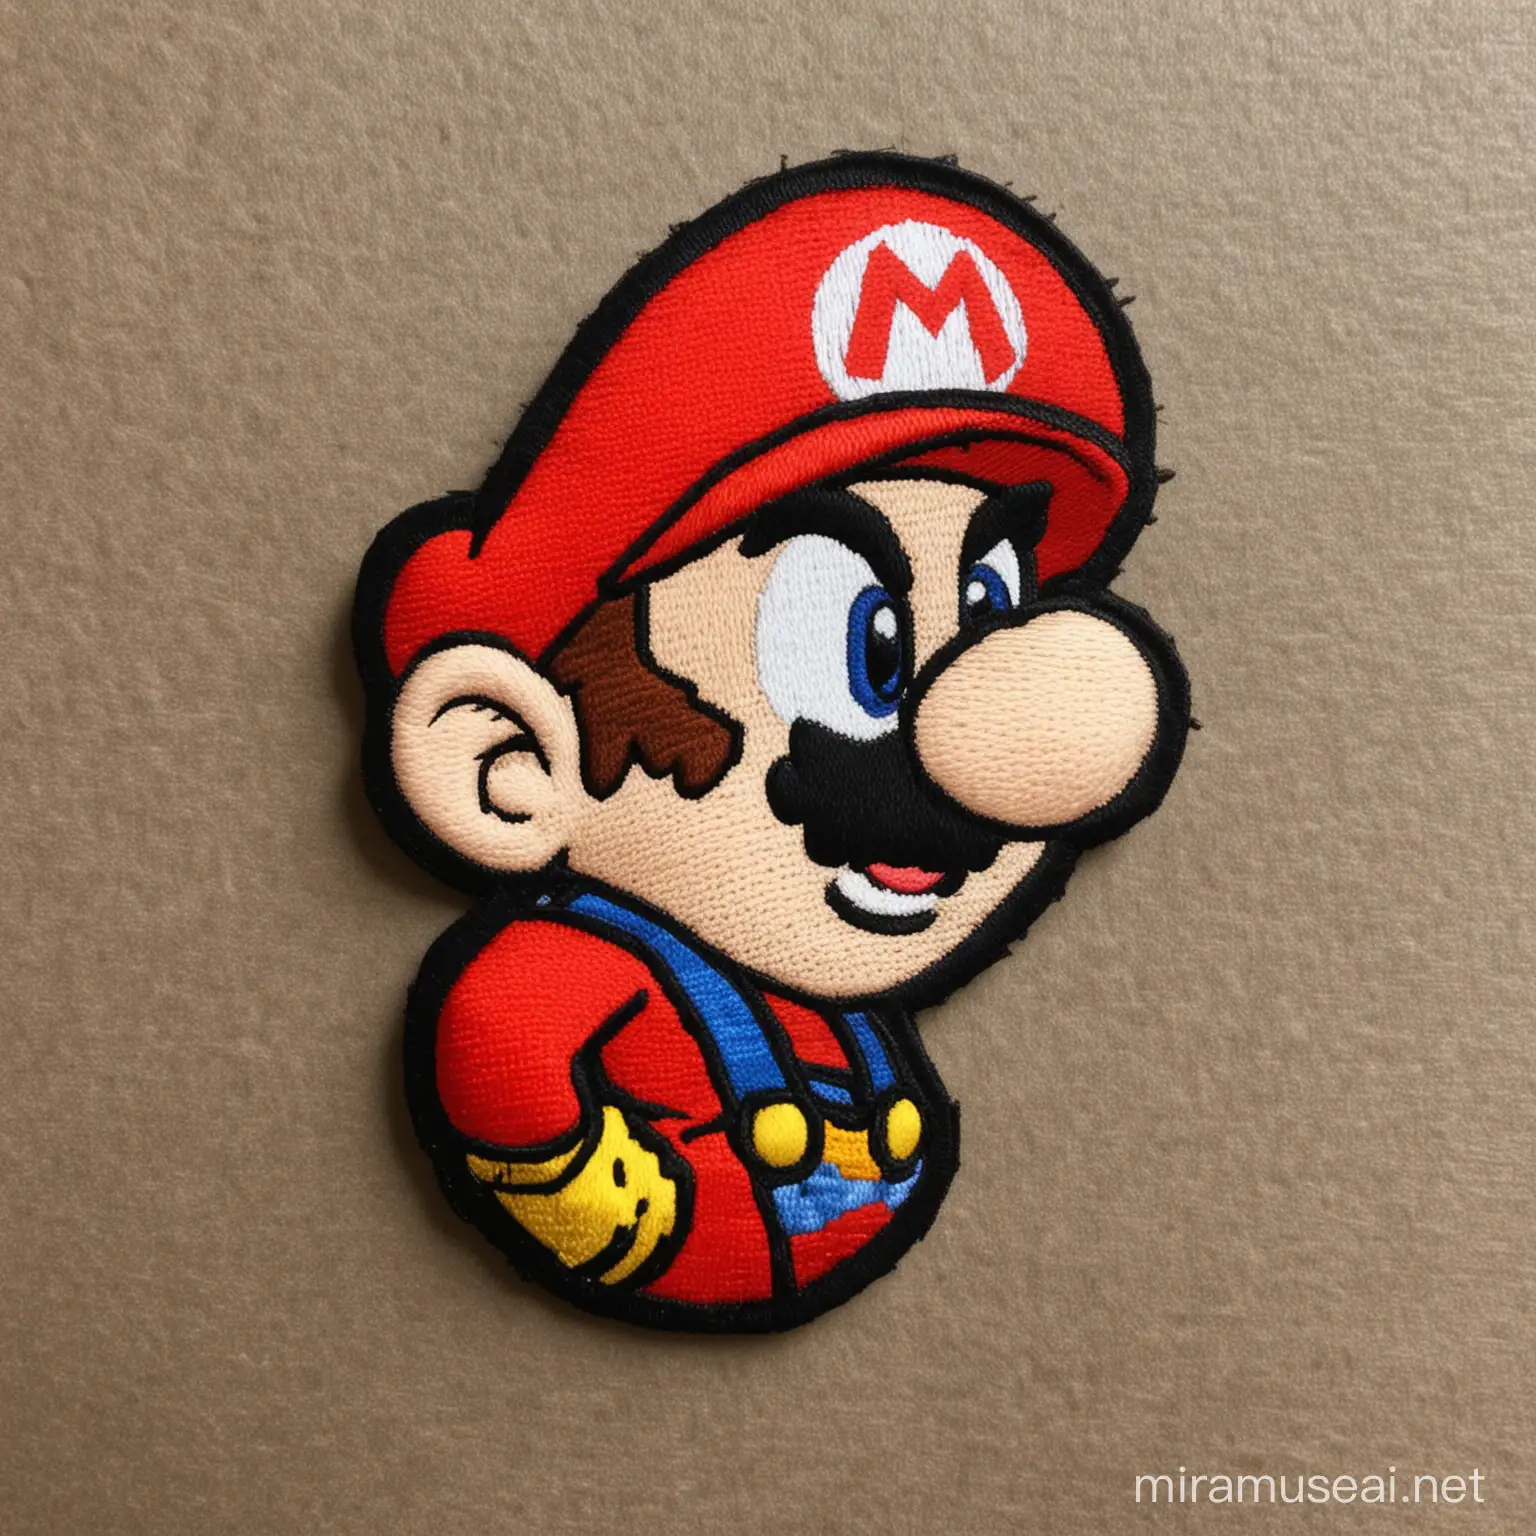 Super Mario embroidered patch